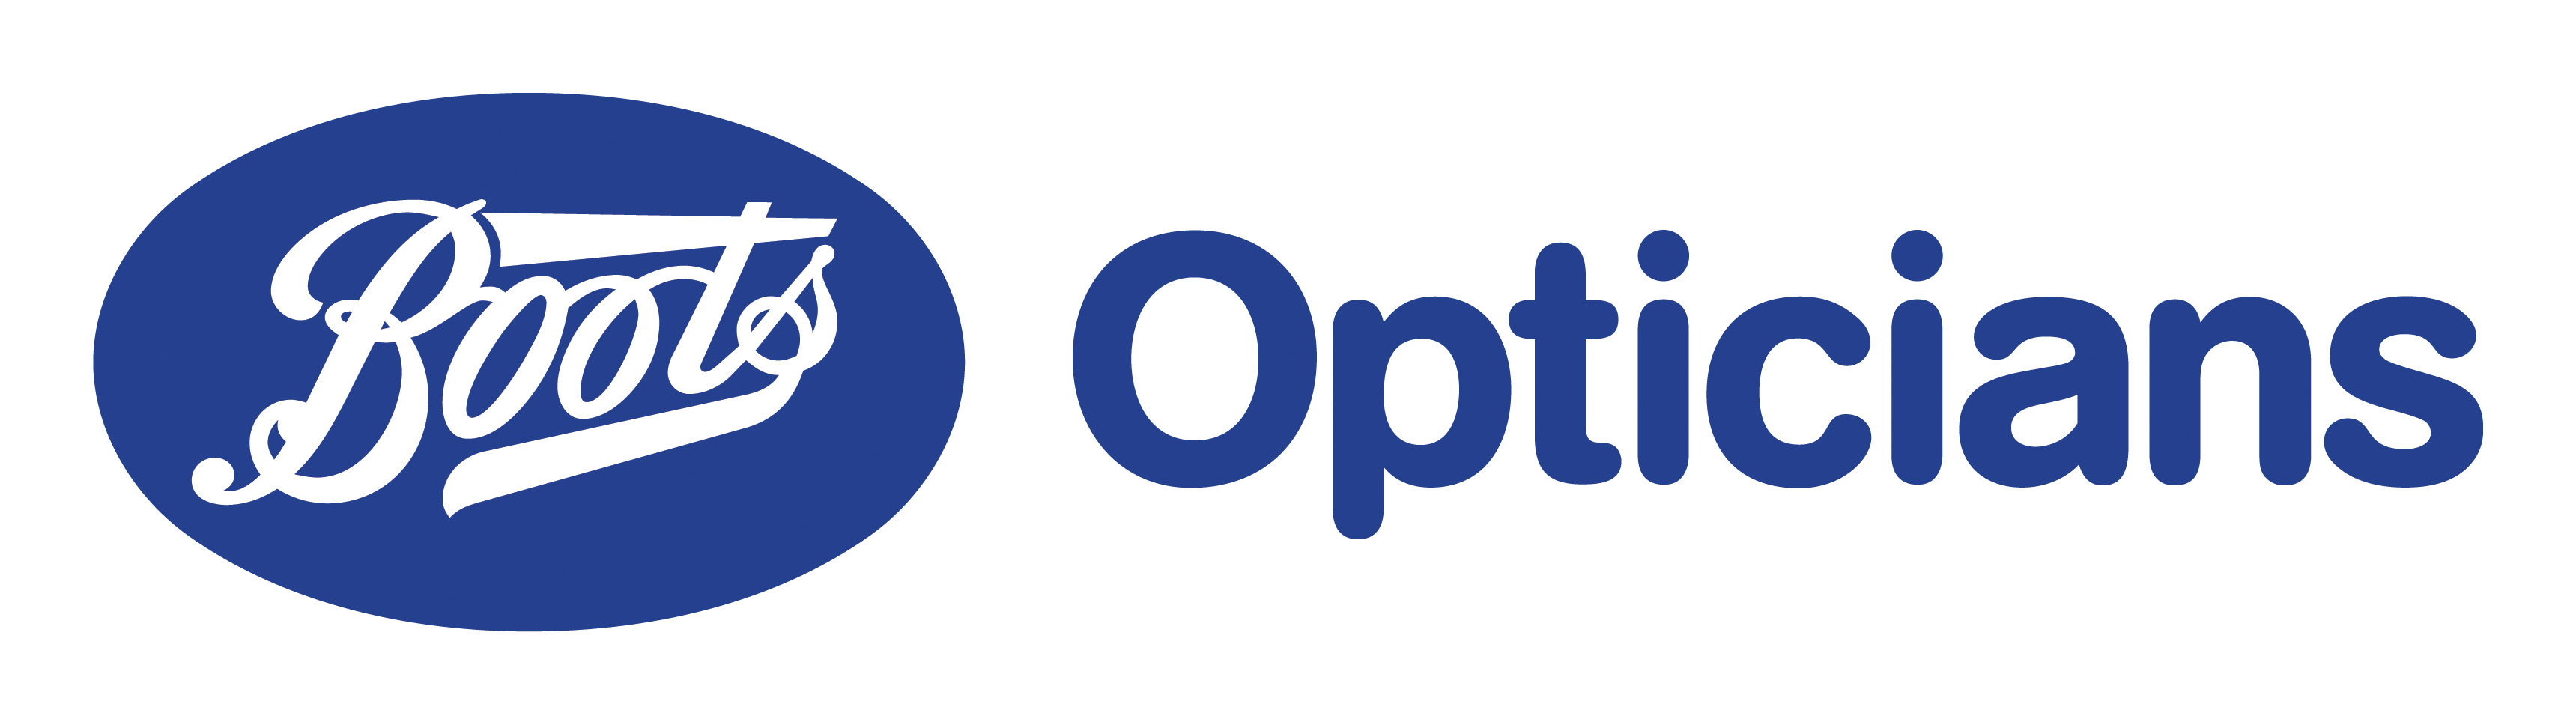 Boots Opticians logo in blue and white.